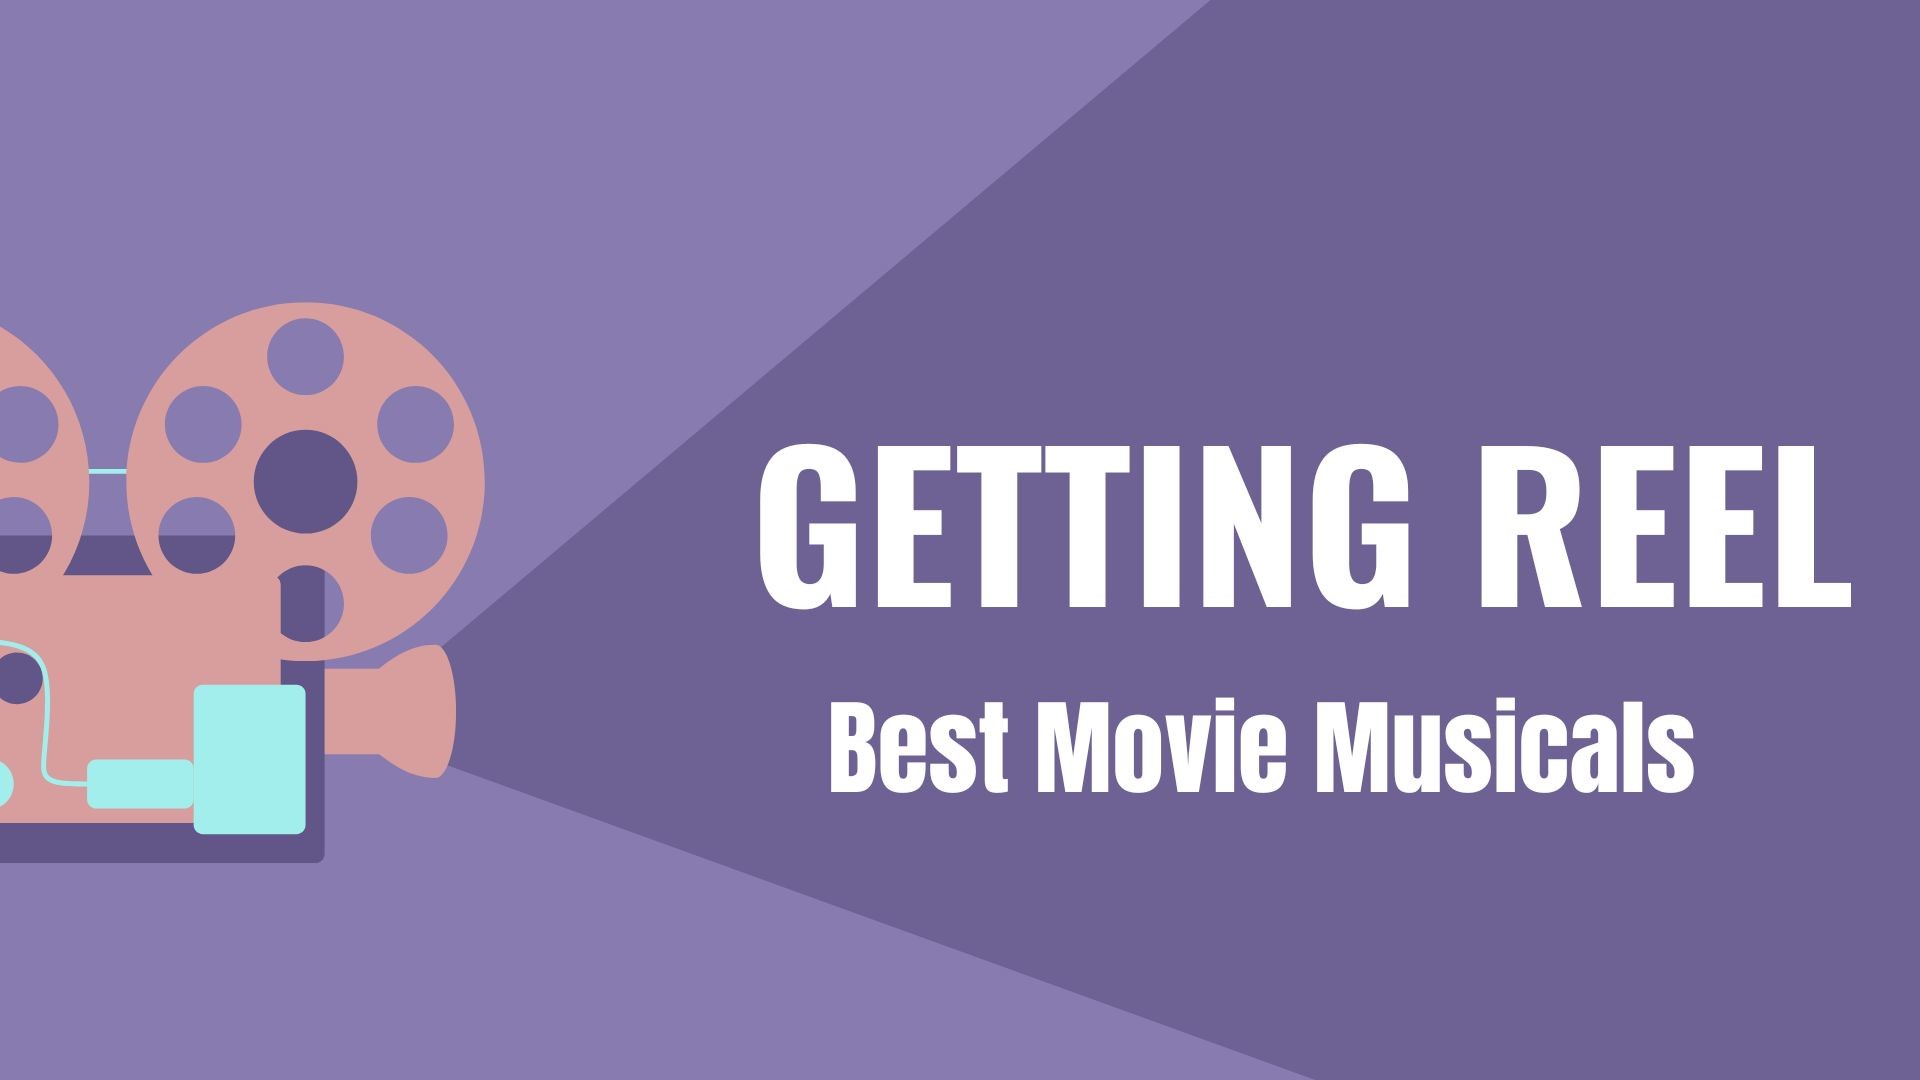 Two members of KTHV discuss their top 5 movie musicals of all time, plus their honorable mentions.